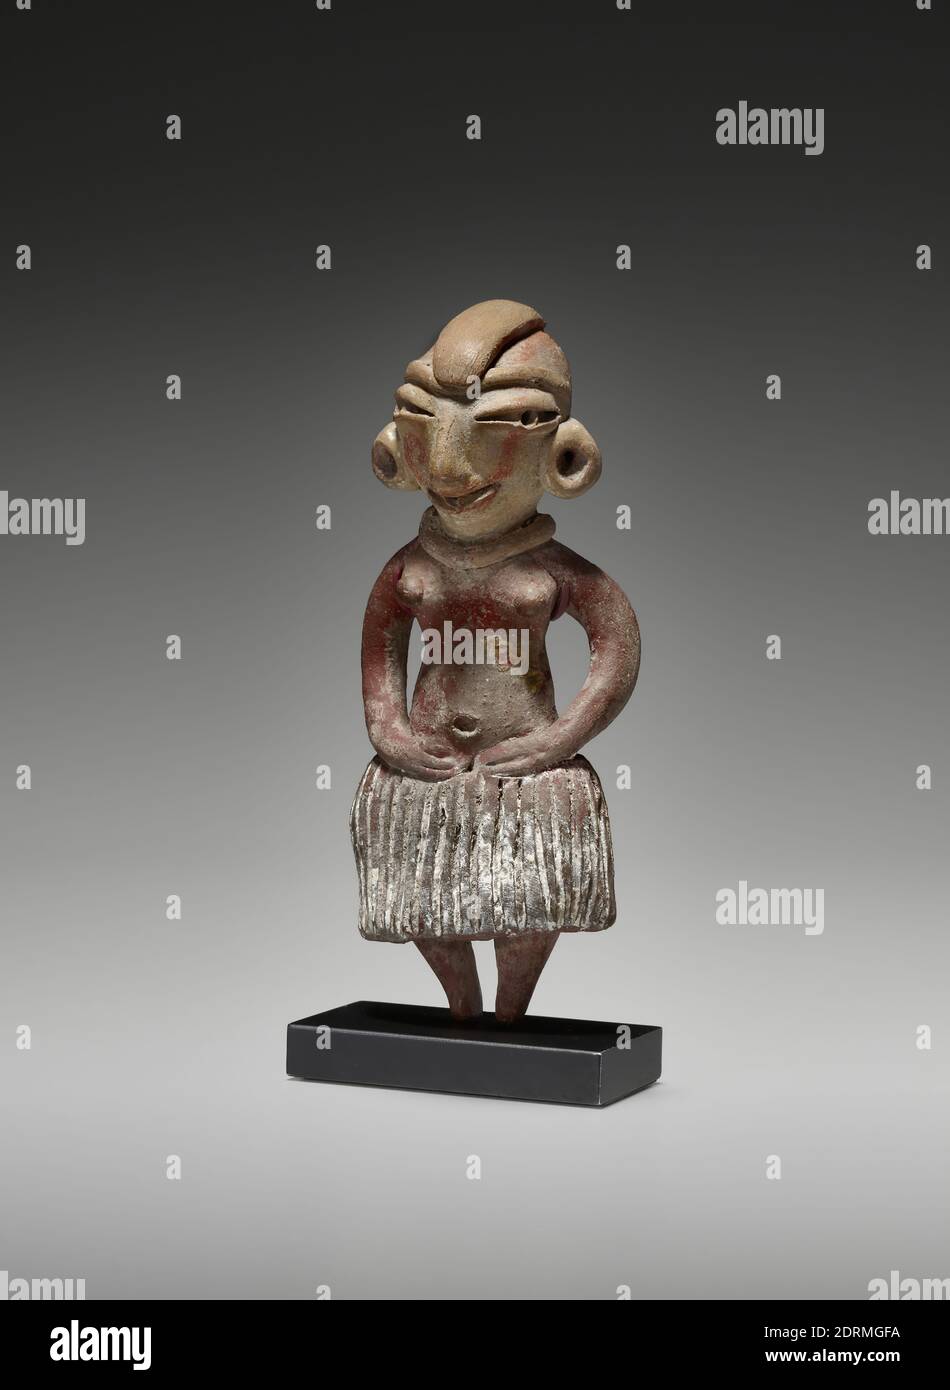 Maker: Unknown, Female Figure with Skirt, Ceramic with pigment, 8.89 × 3.175 × 1.905 cm (3 1/2 × 1 1/4 × 3/4 in.), Made in Tlatilco, Mexico, Mexico, Tlatilco, Early Formative Period, Sculpture Stock Photo